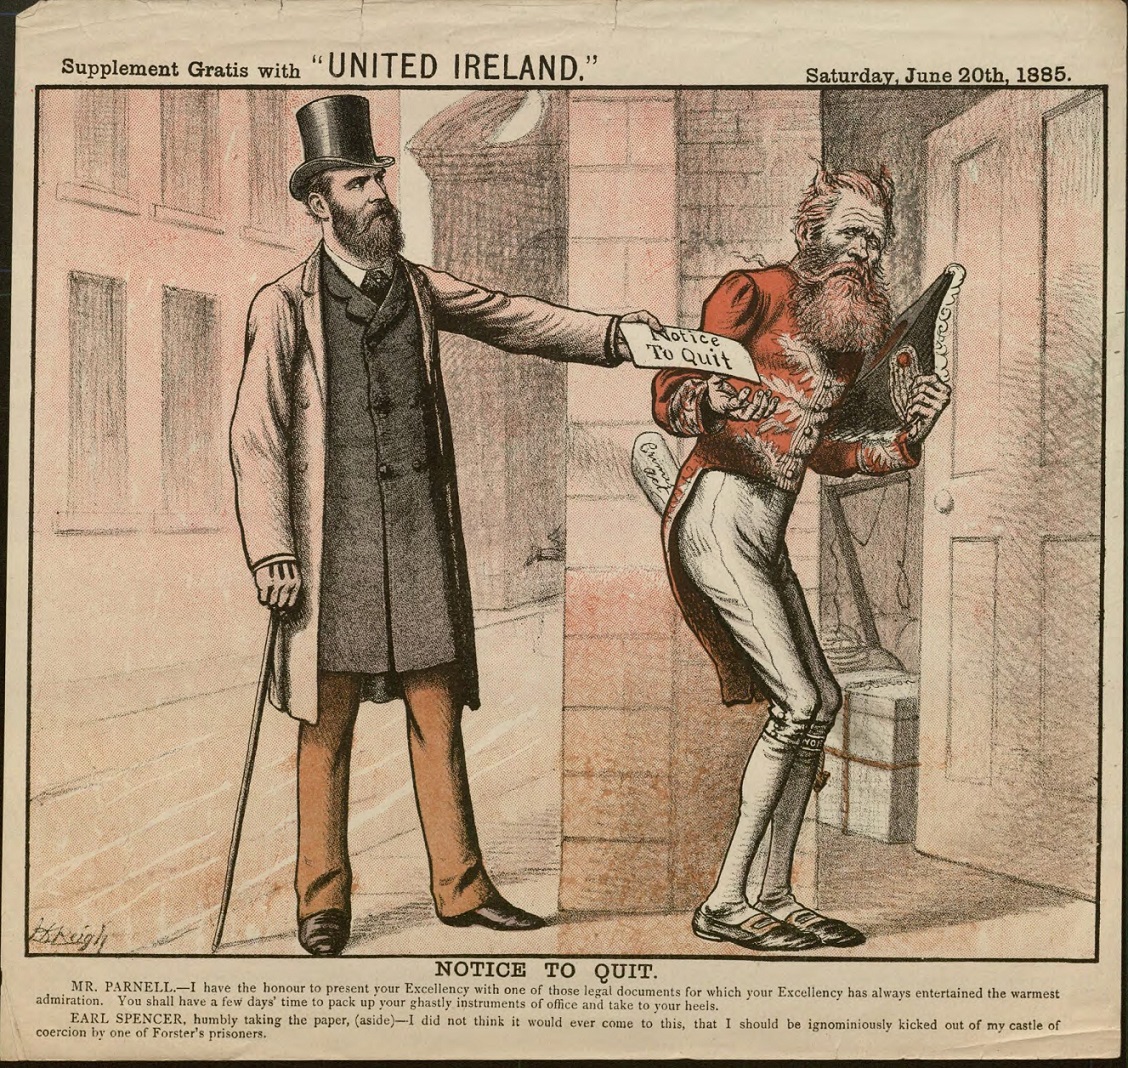 Image of Color Supplement from United Ireland, Cartoon featuring Parnell and Earl Spencer, June 20, 1885